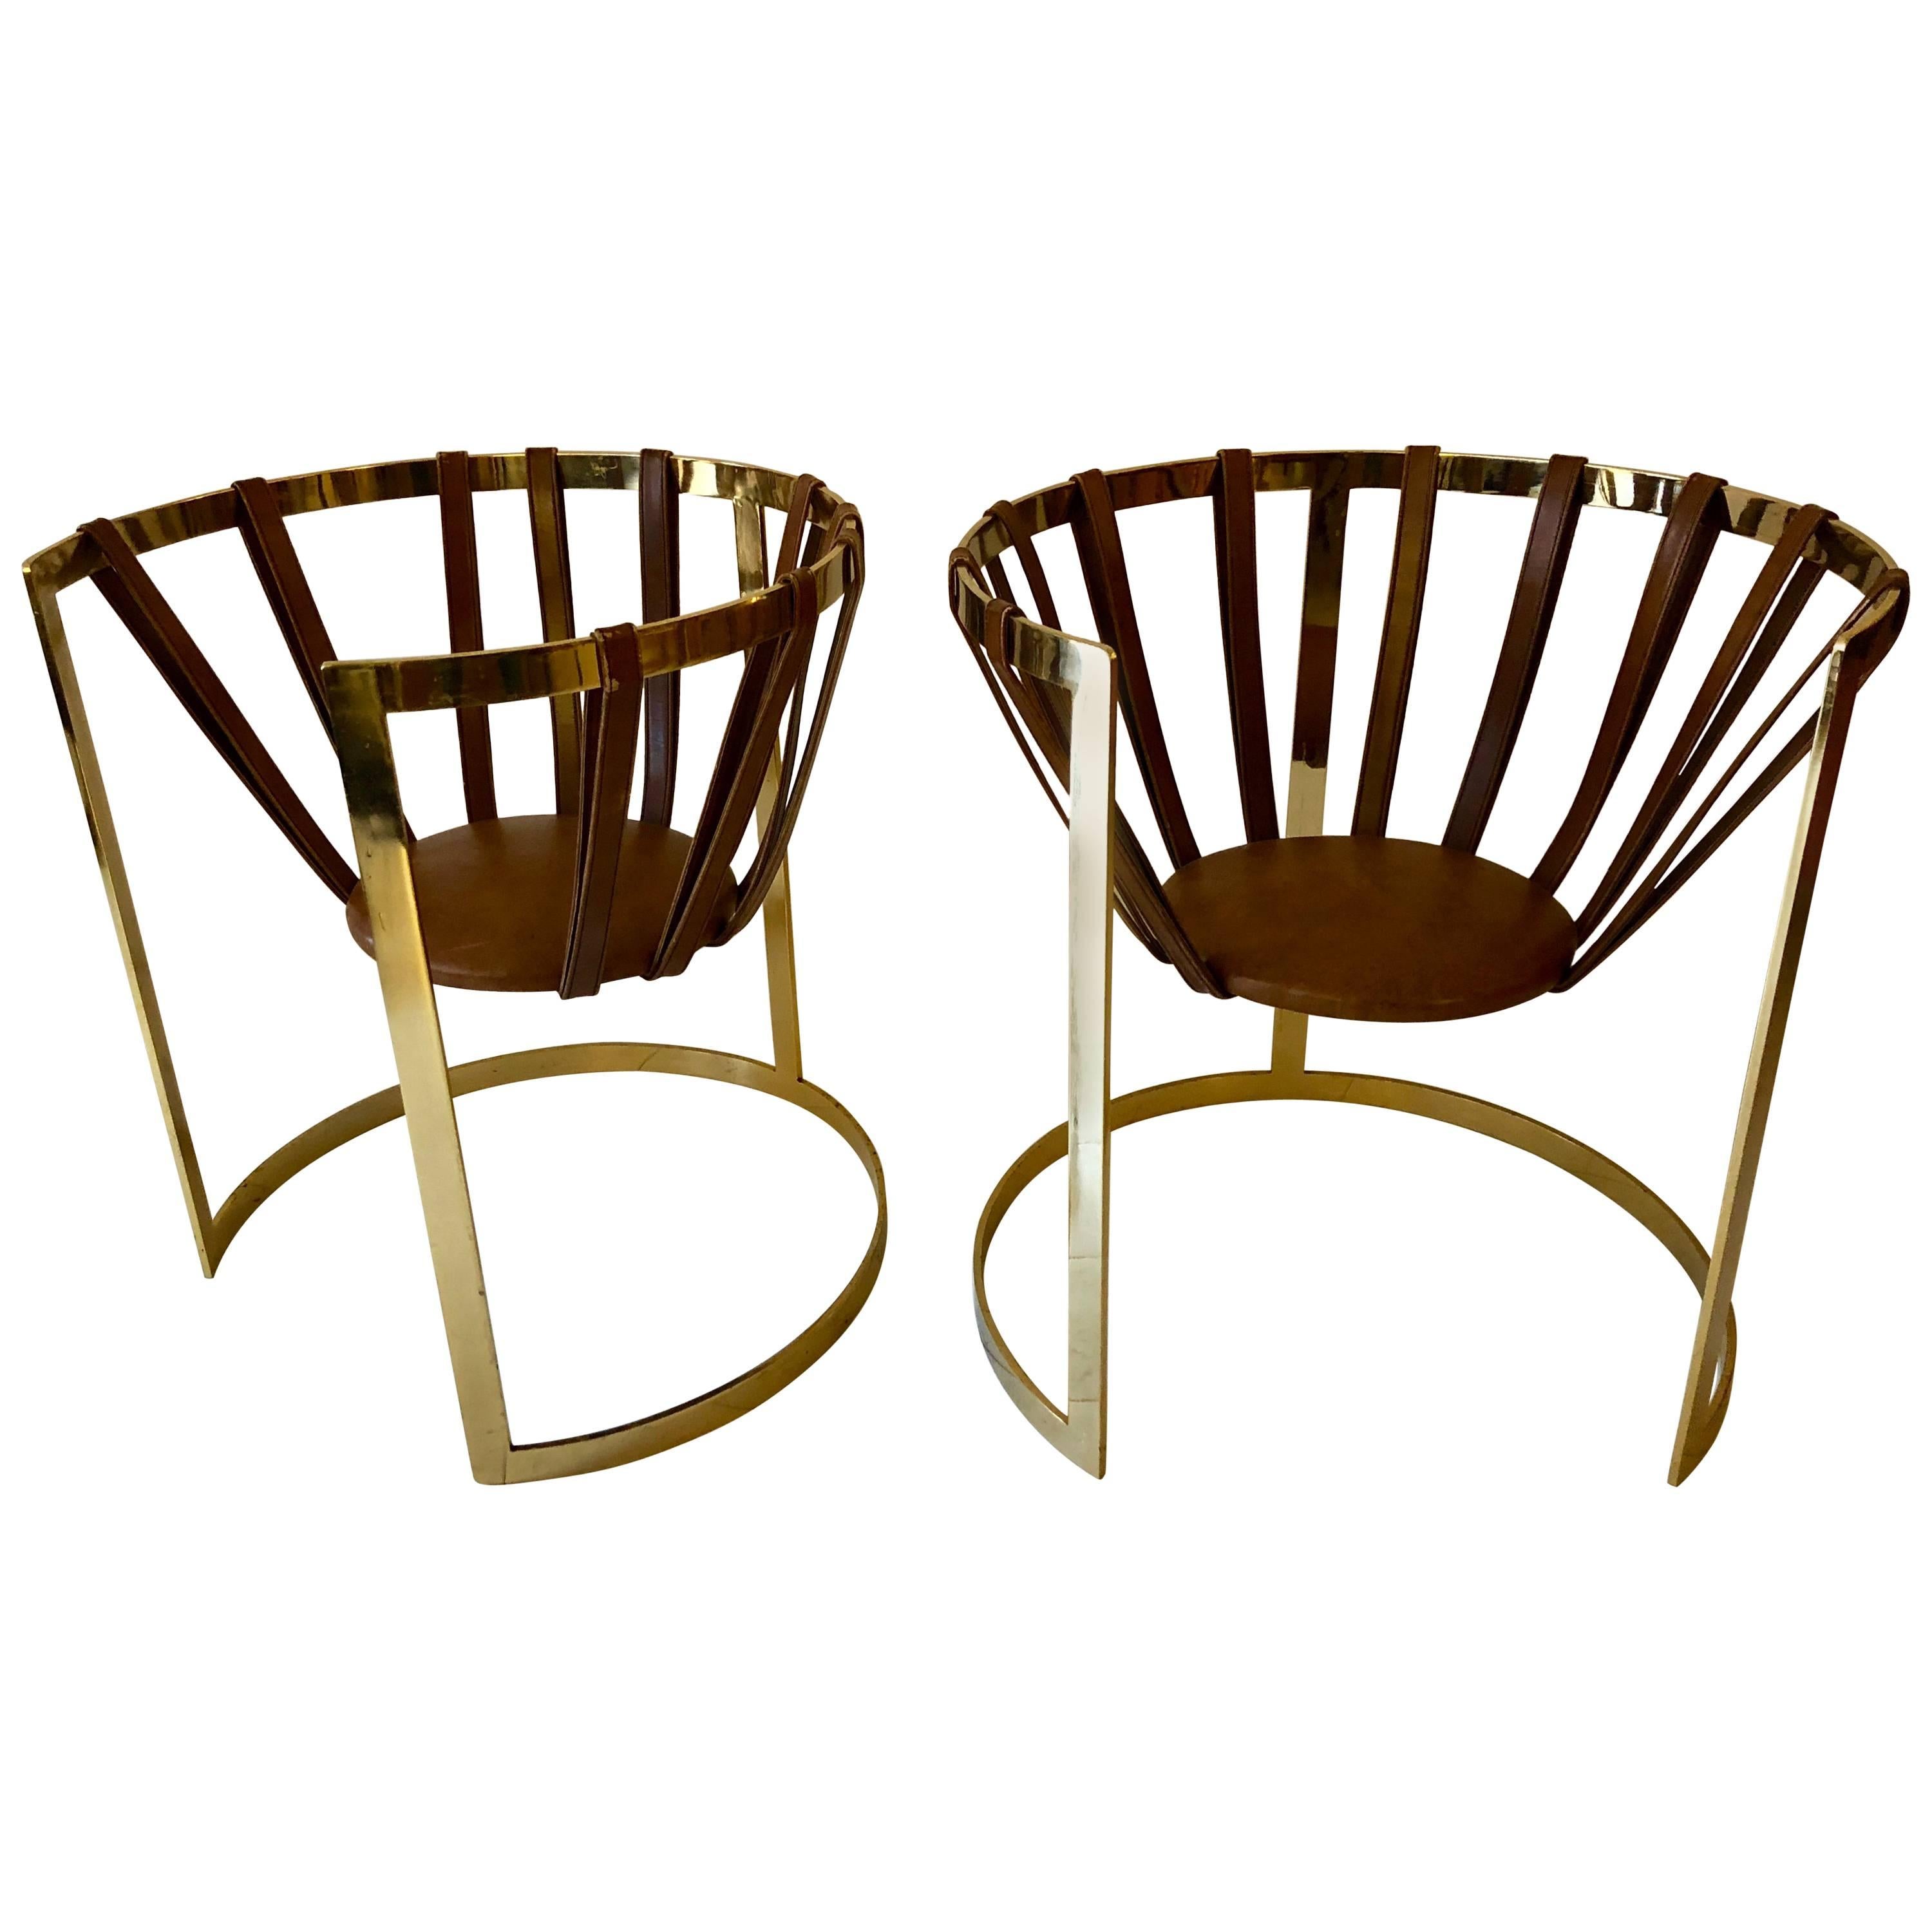 Pair of Brass and Leather Sling Chairs